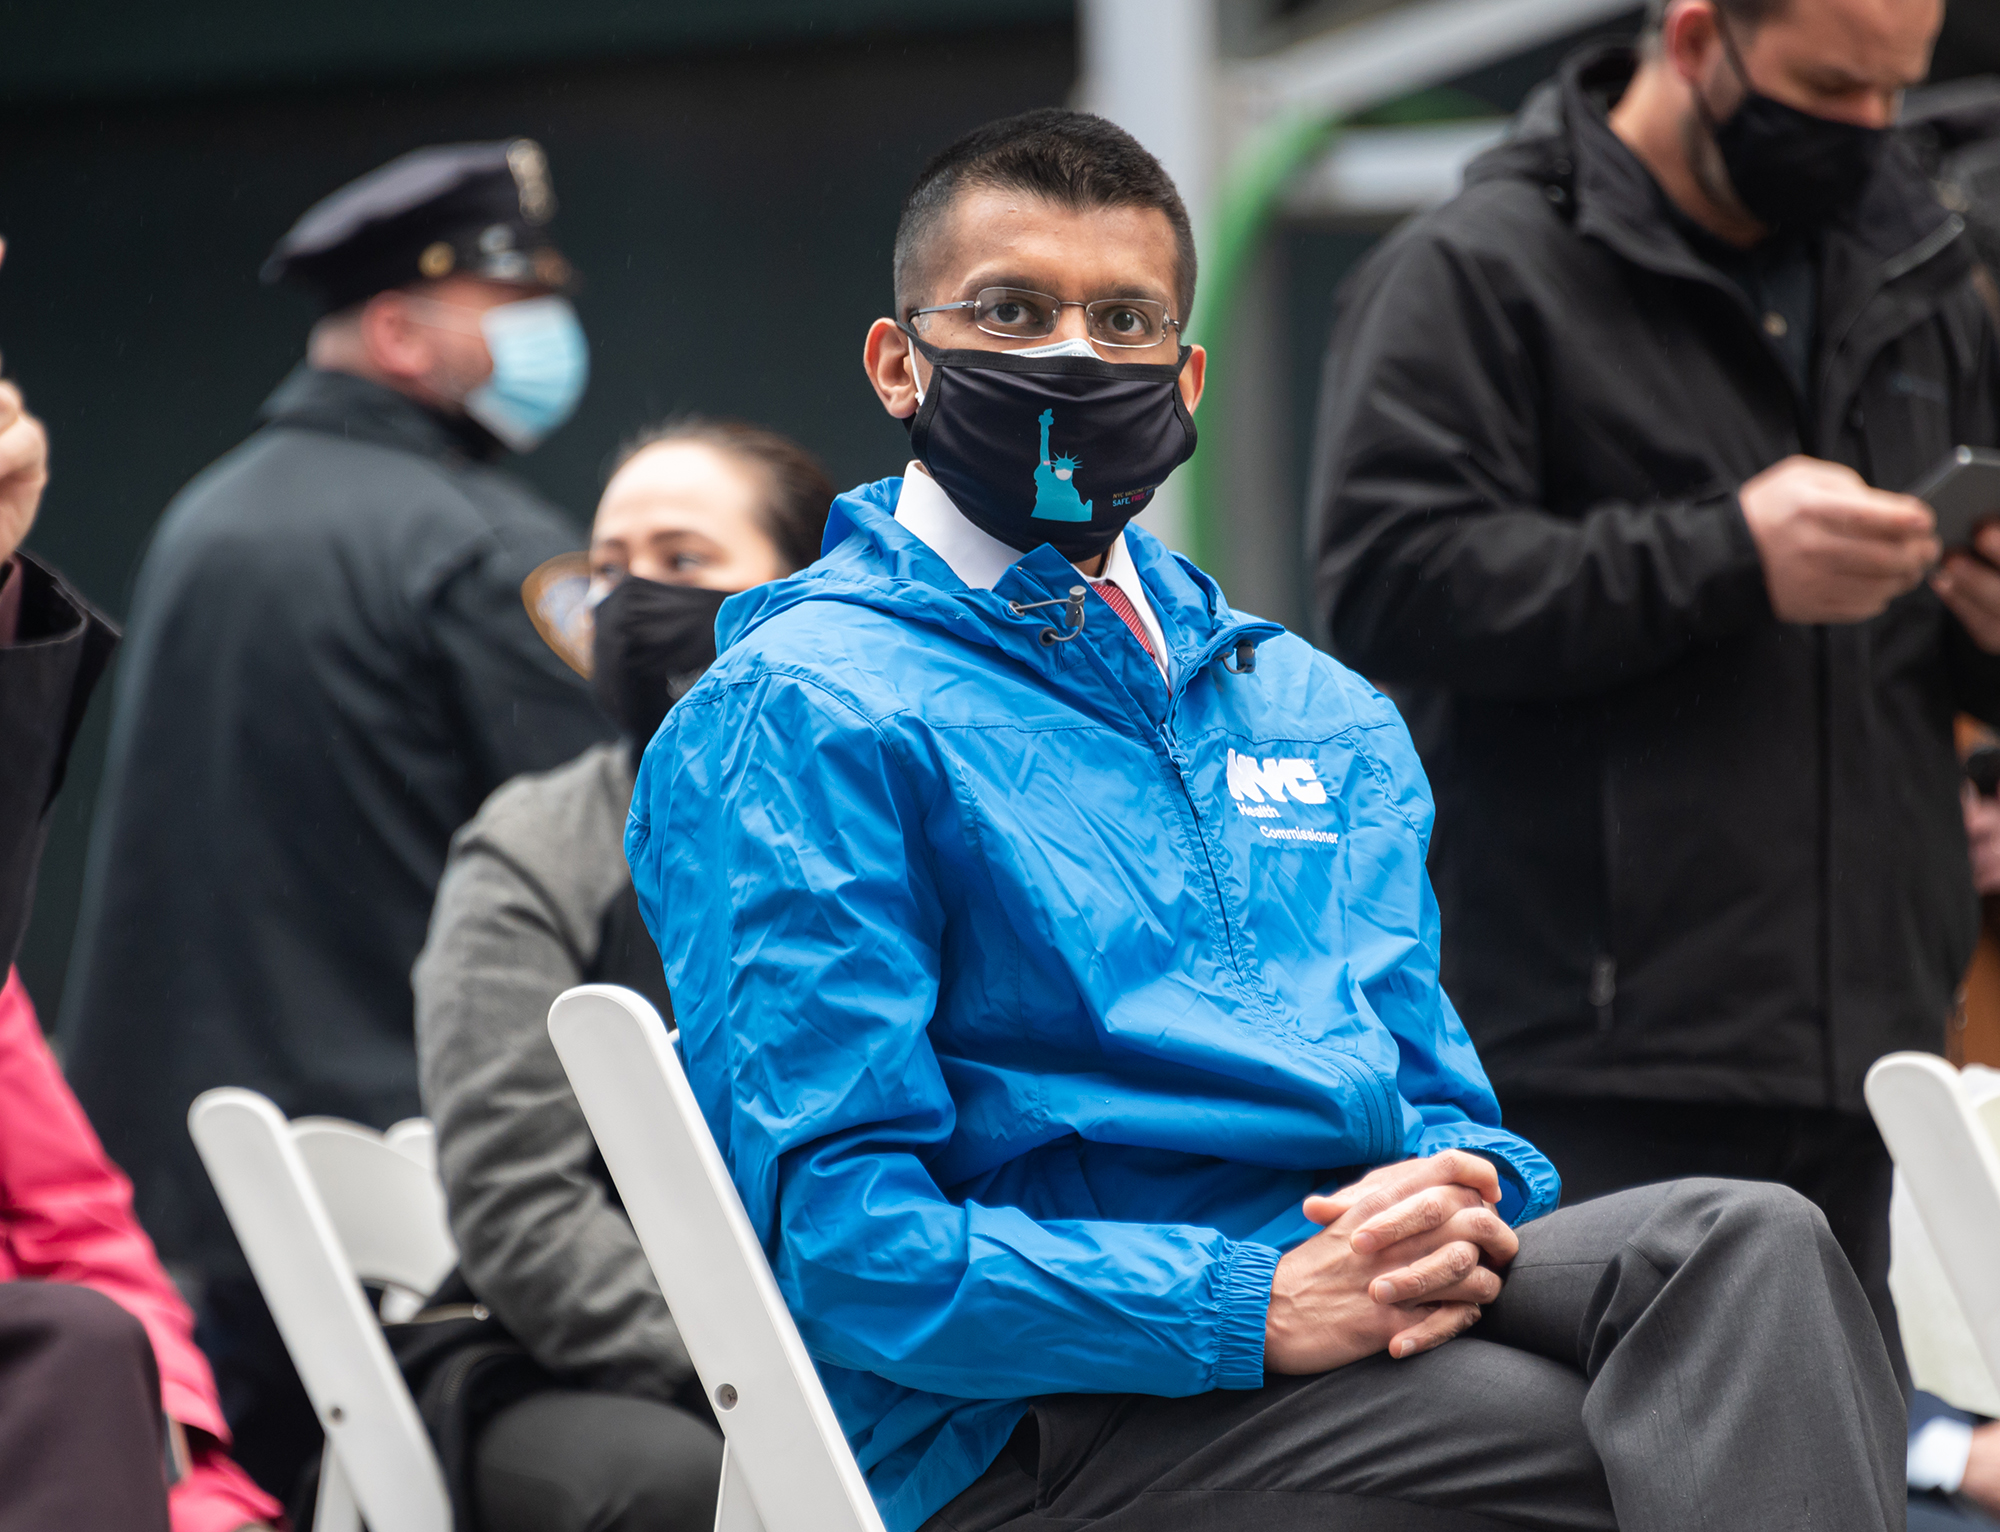 Commissioner of the New York City Department of Health and Mental Hygiene Dr. Dave A. Chokshi attends the opening of a vaccination center for Broadway workers in Times Square on April 12, 2021 in New York City.